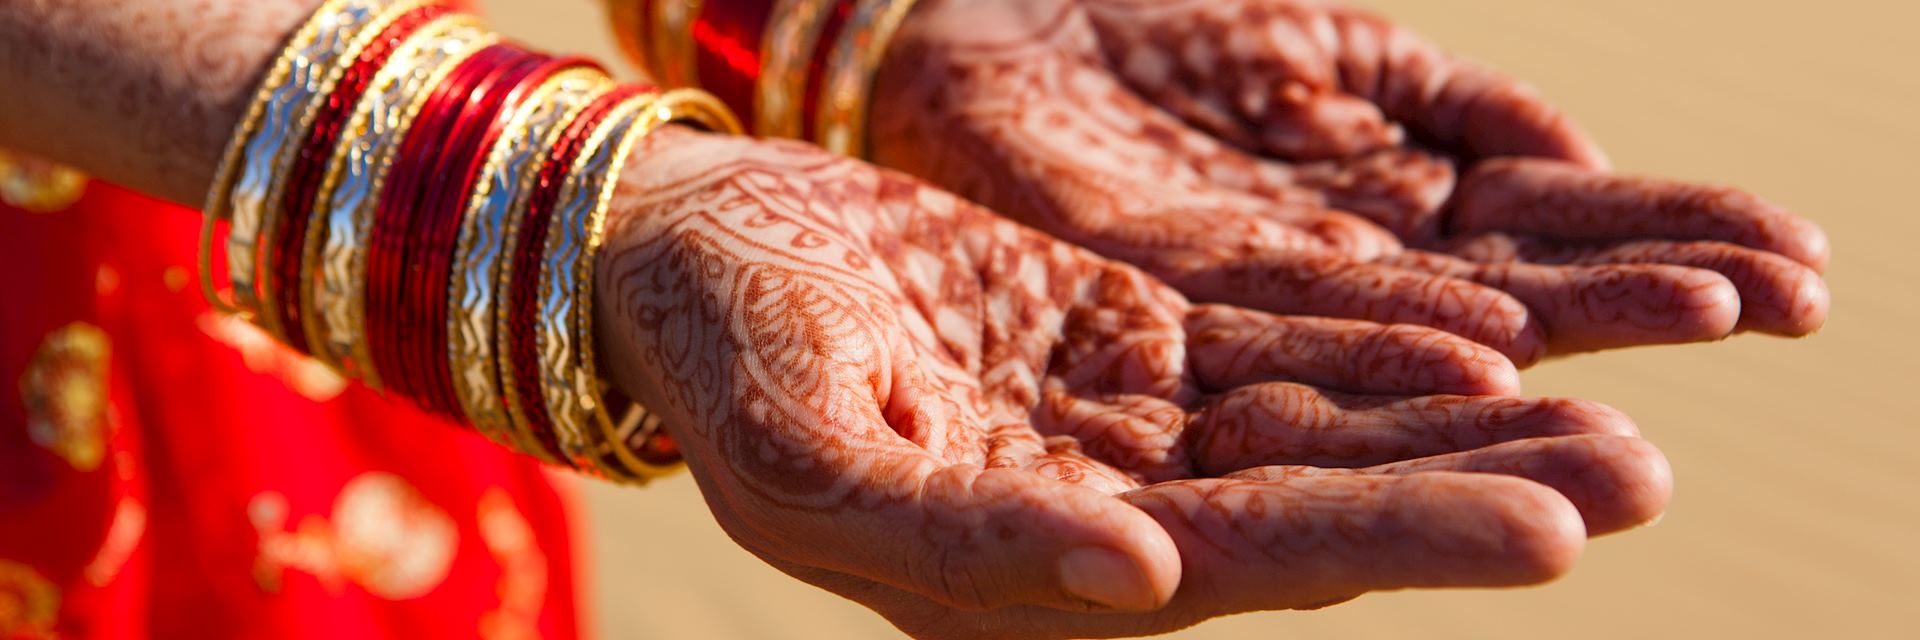 Traditional henna designs, India